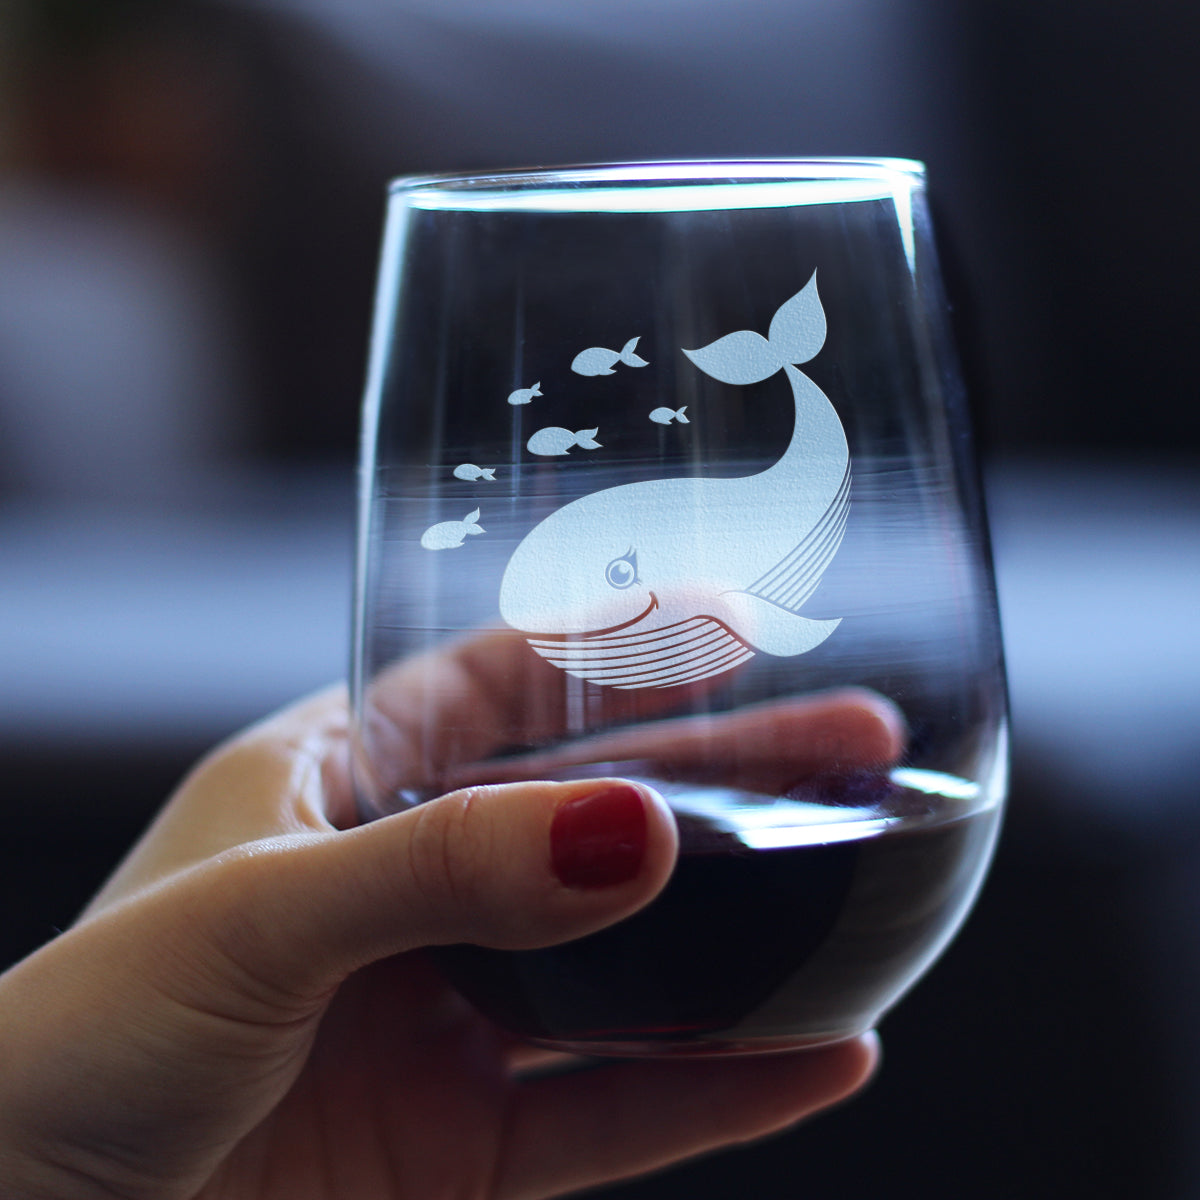 Cute Whale Stemless Wine Glass - Beach Themed Decor and Gifts for Whale Lovers - Large 17 Oz Glasses